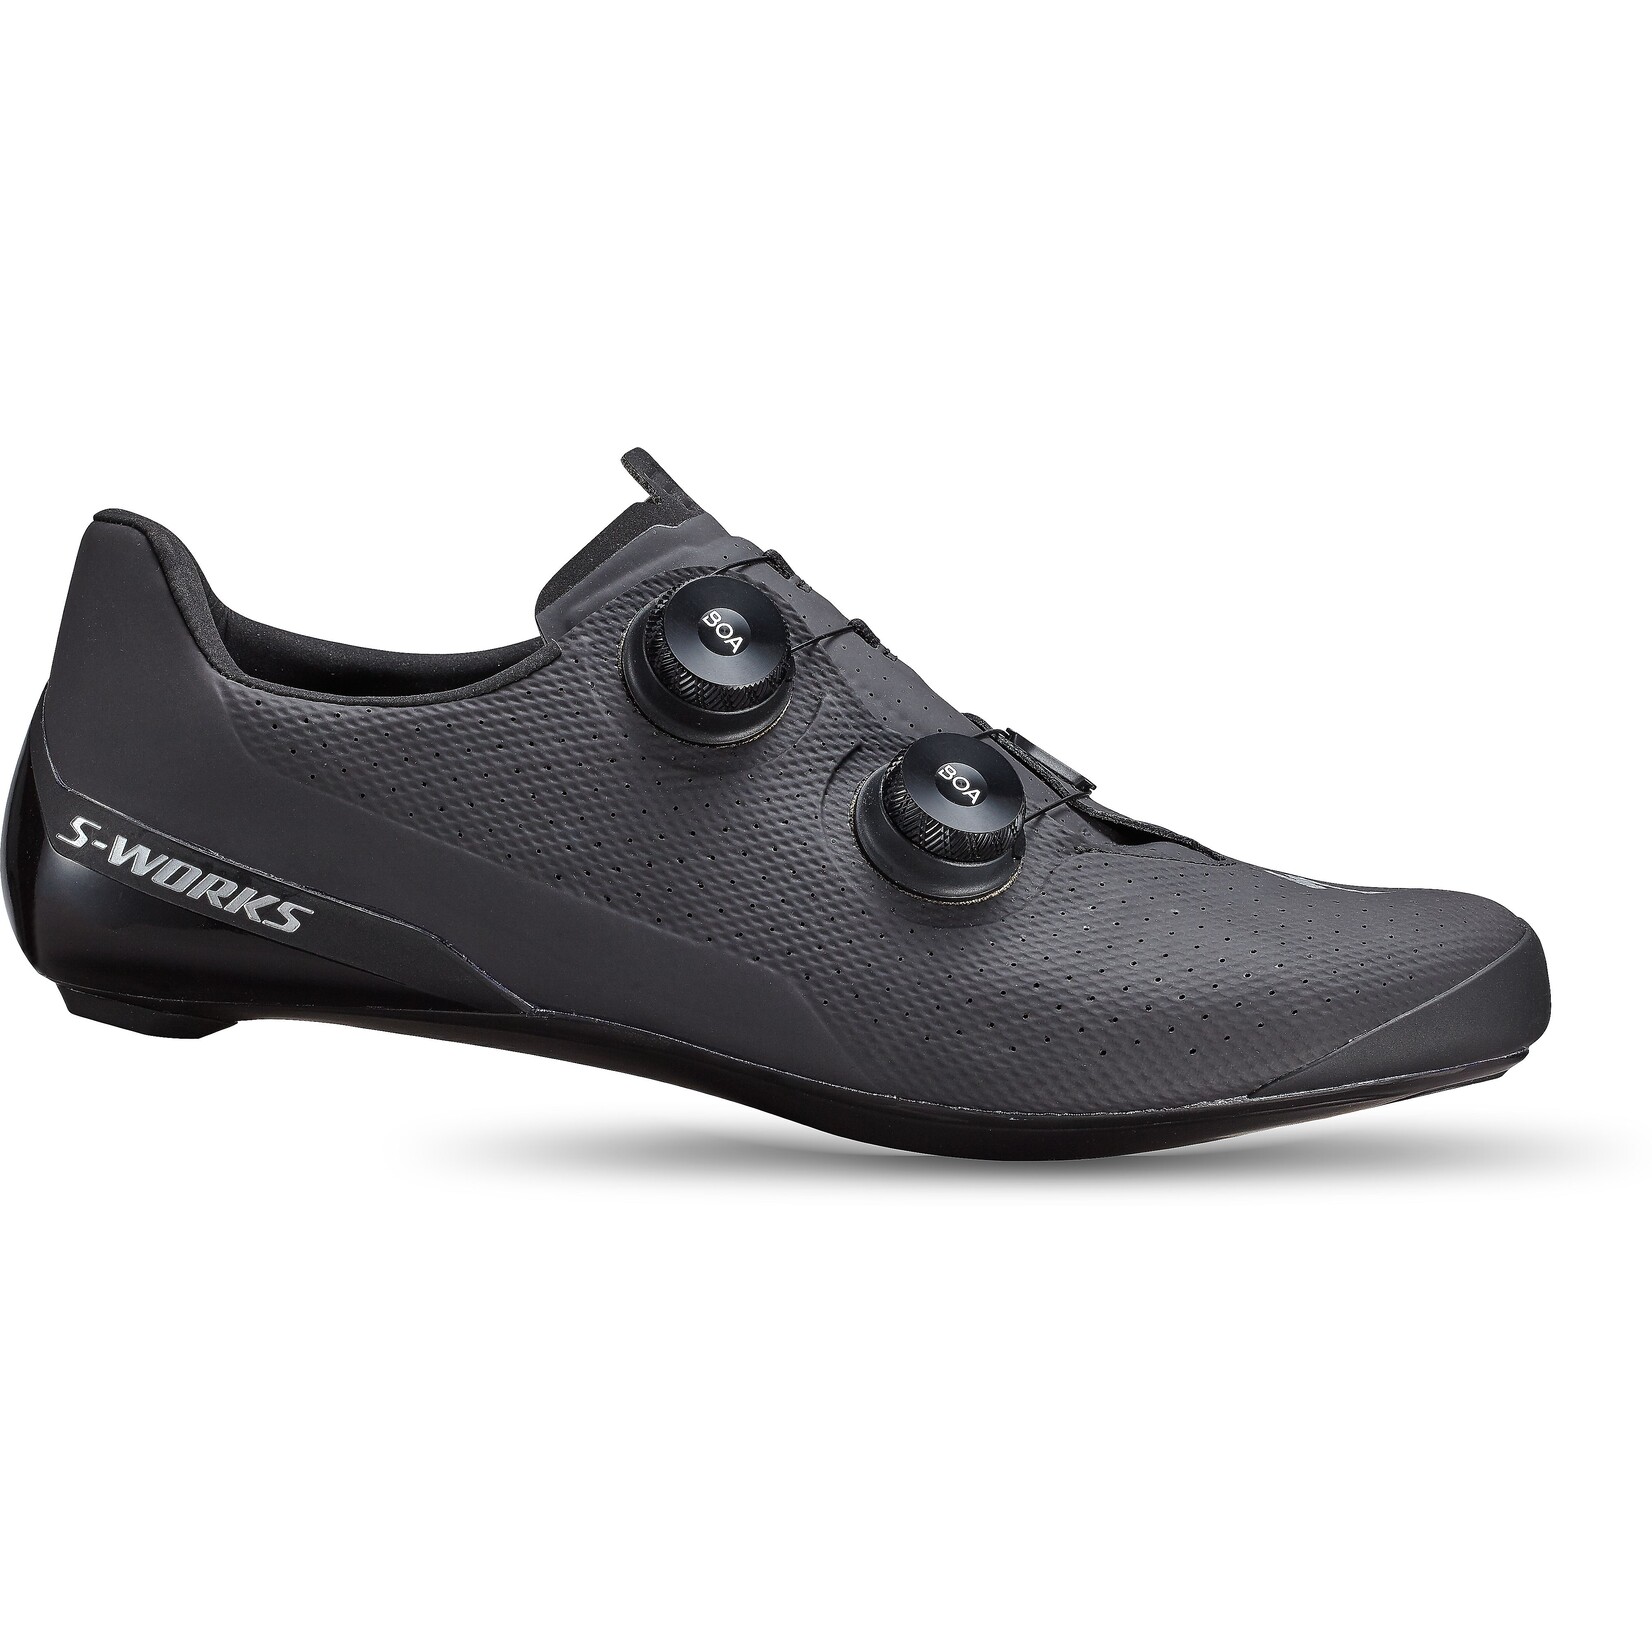 Specialized SW TORCH RD SHOE BLK NARROW 42.5